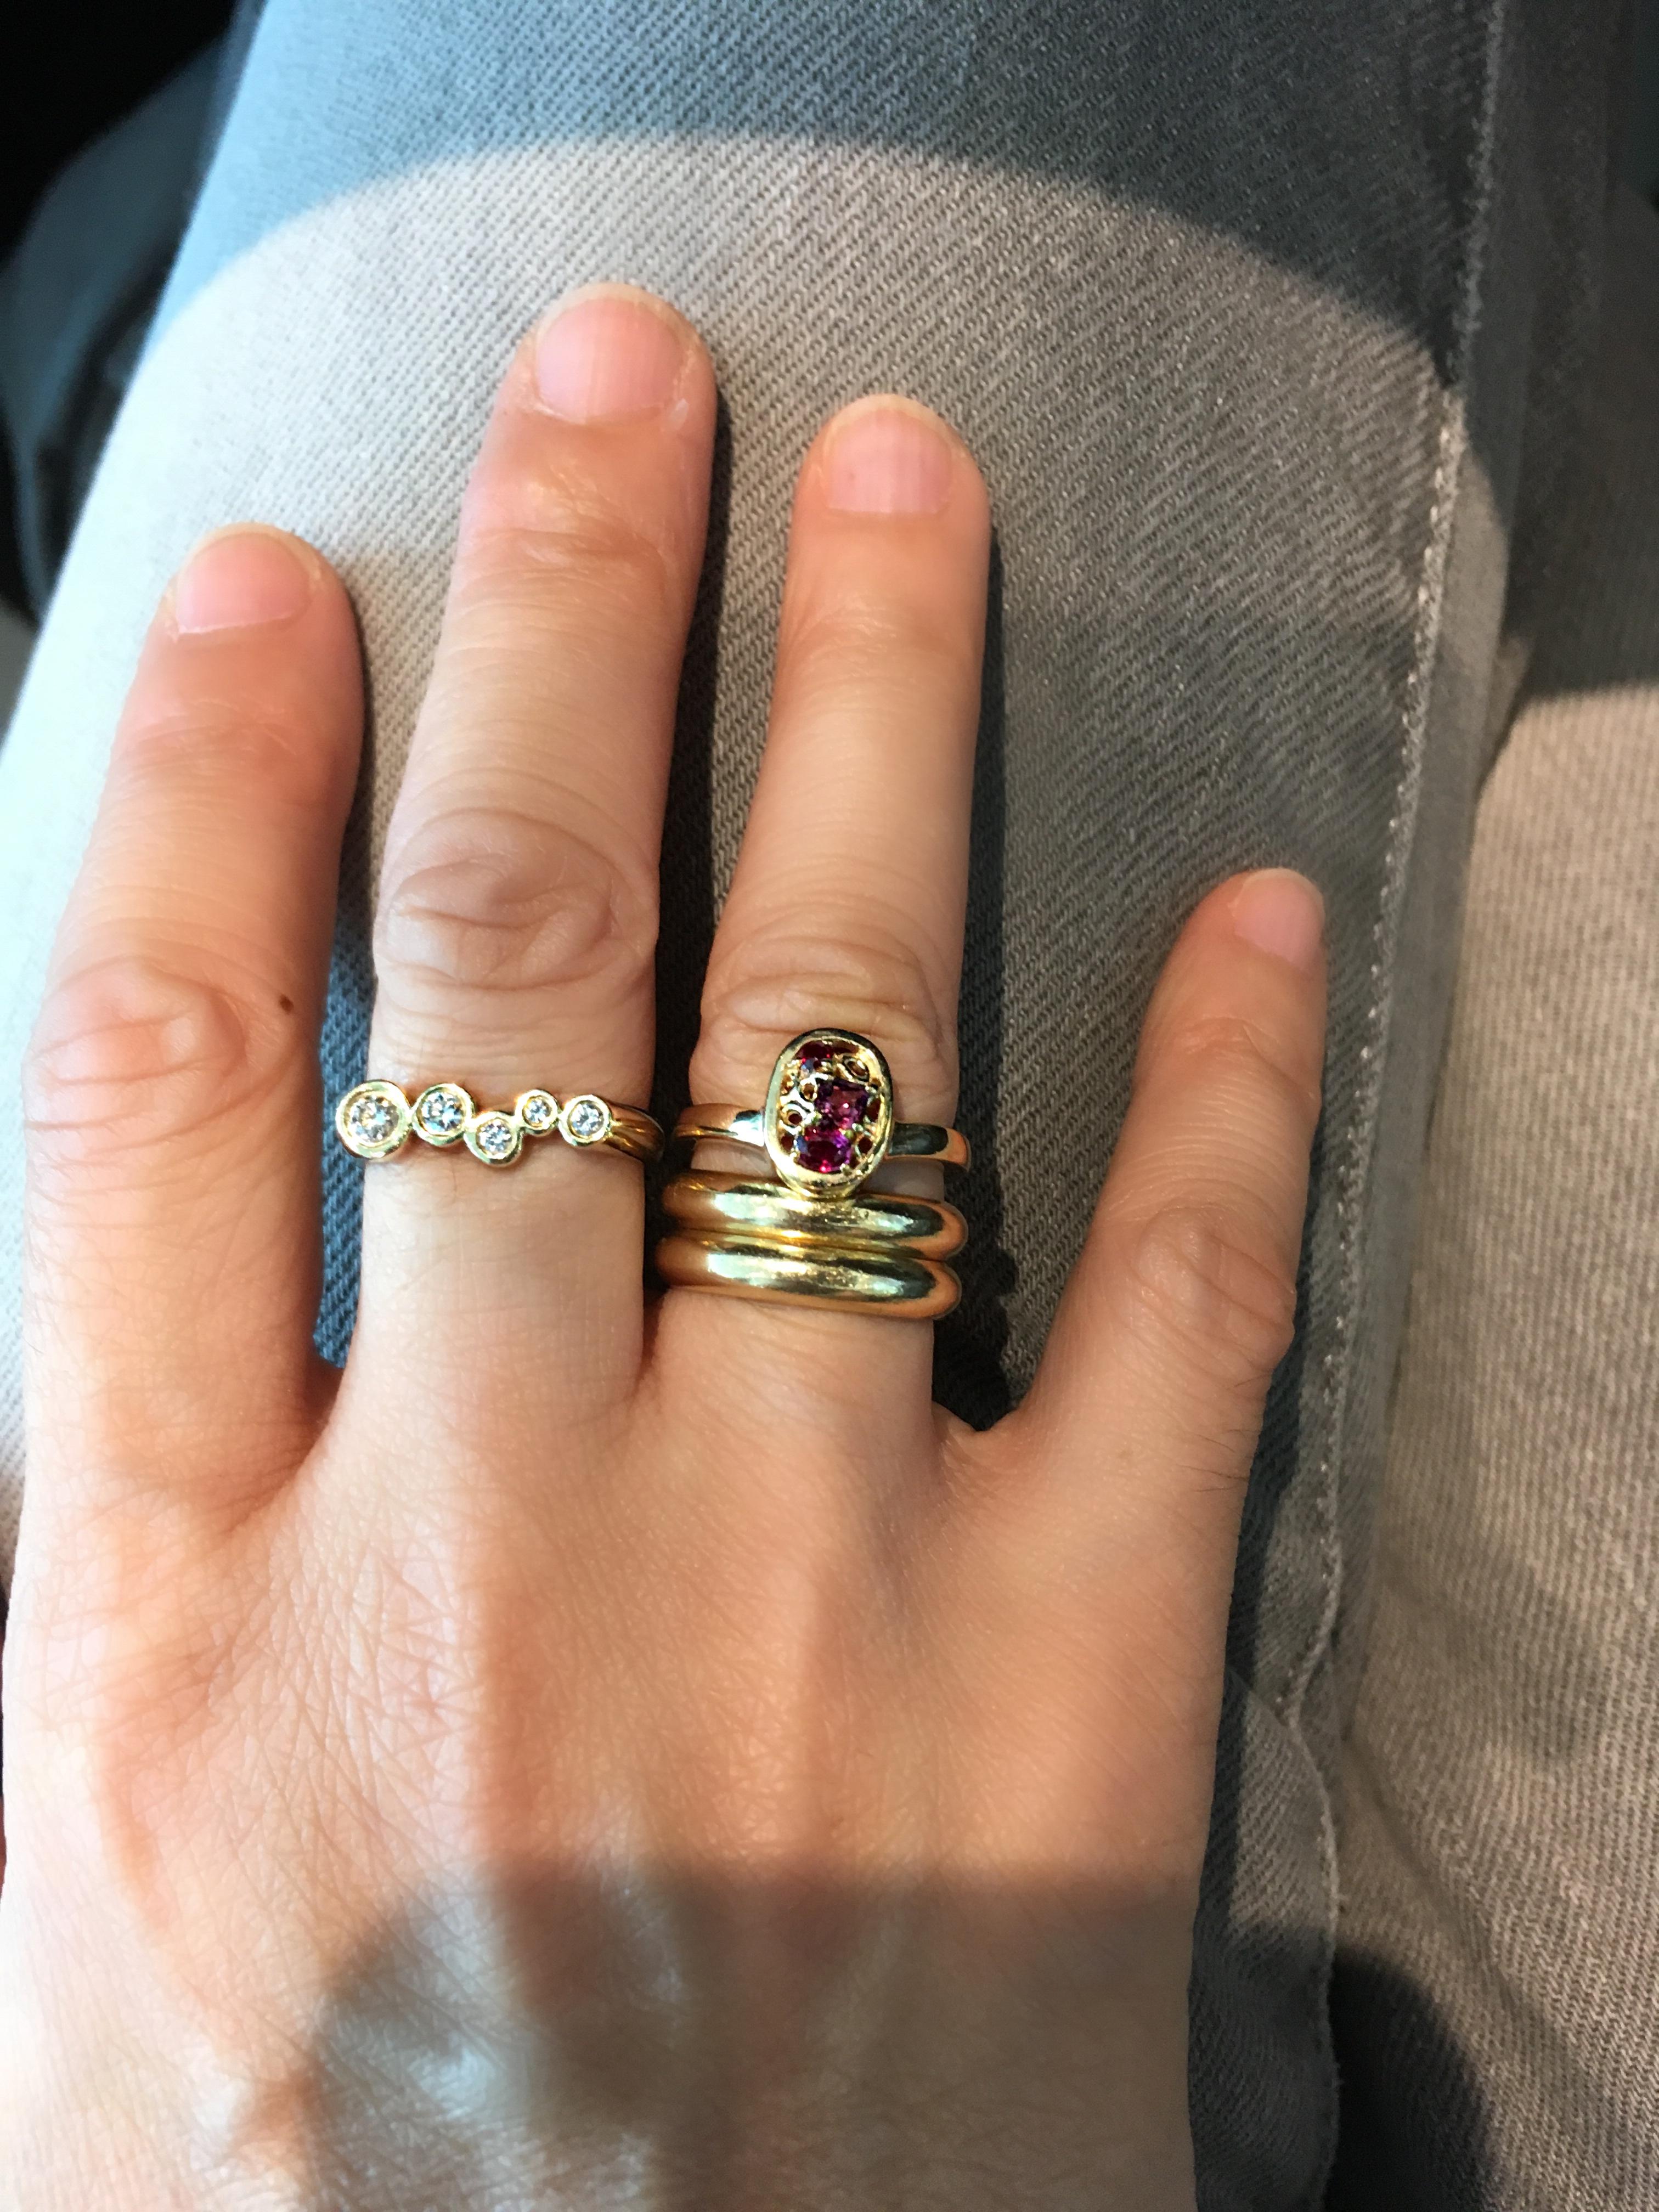 The Slightly curved ring band is made to stack neatly with your favorite rings. 
Cluster of tonal red gem stones set amongst Hi June Parker's signature organic
circles with a tapered ring band for a comfortable fit.

Inspired by seeing the